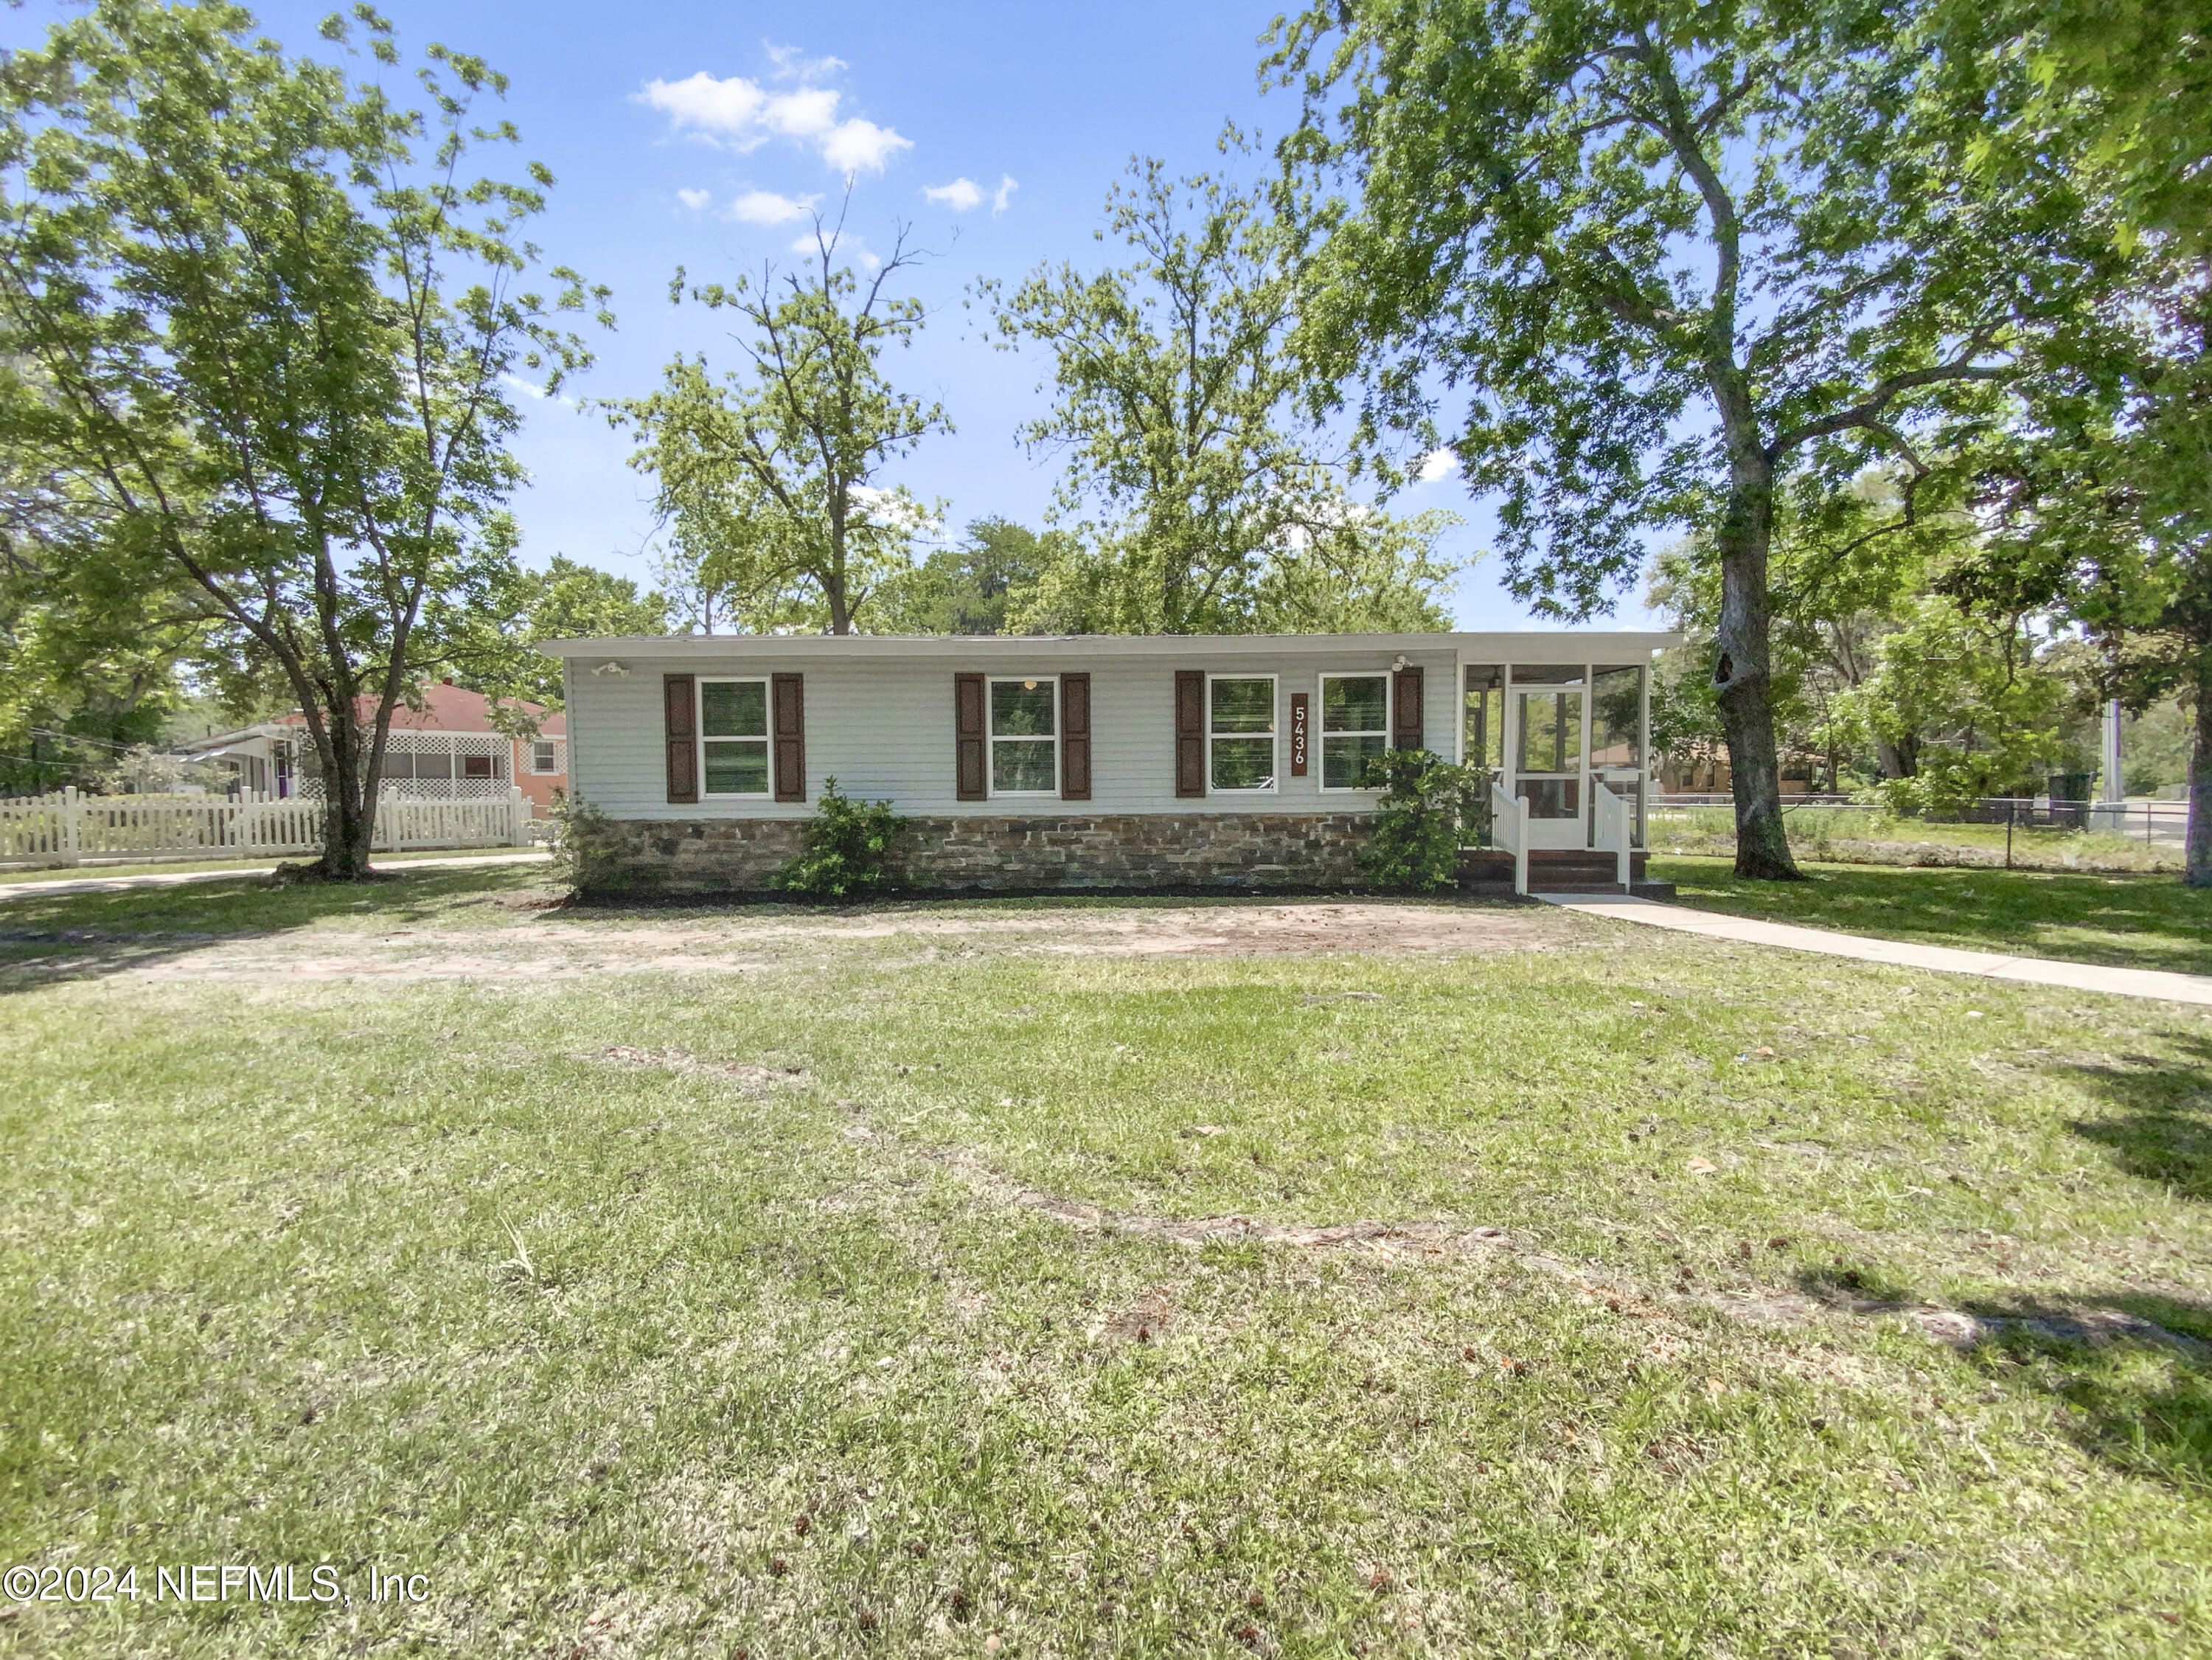 Jacksonville, FL home for sale located at 5436 Mays Drive, Jacksonville, FL 32209